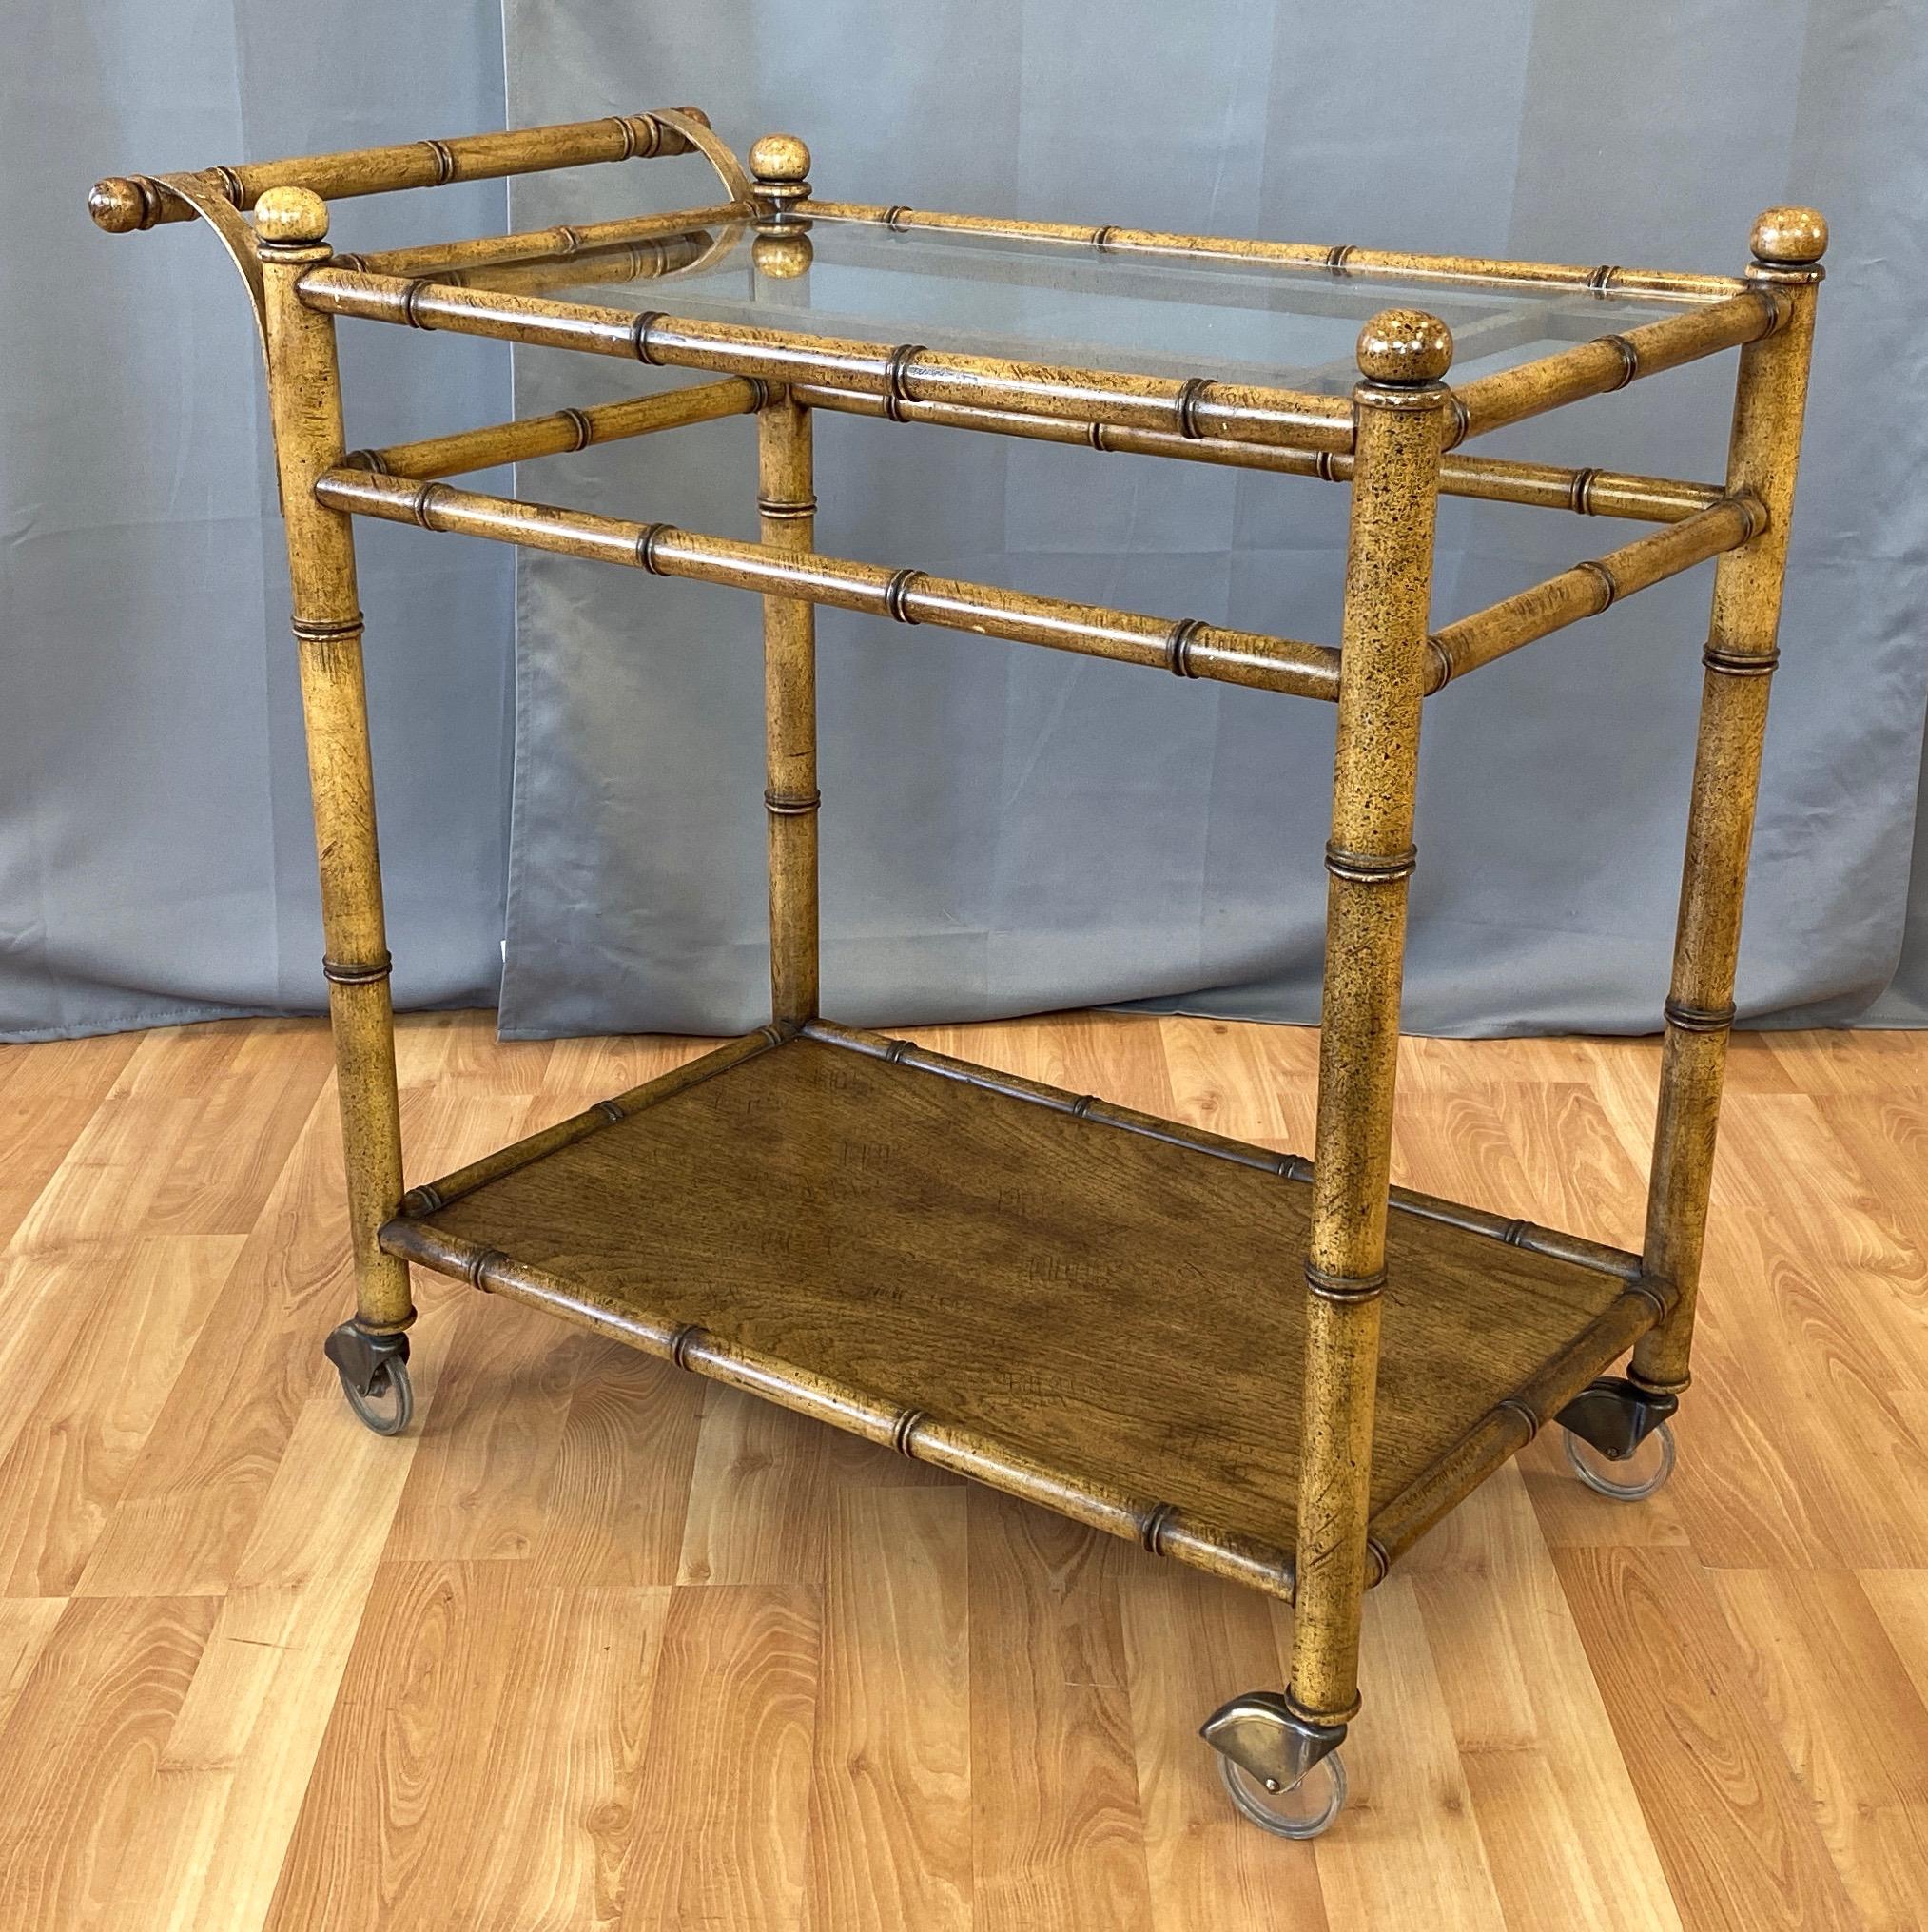 A generously sized and rare 1960s Chinese Chippendale-style faux bamboo and glass bar or serving cart by Medallion Limited.

Stylized bamboo motif oak frame done in the manner of Hollywood Regency period Chippendale or Kittinger chinoiserie chairs